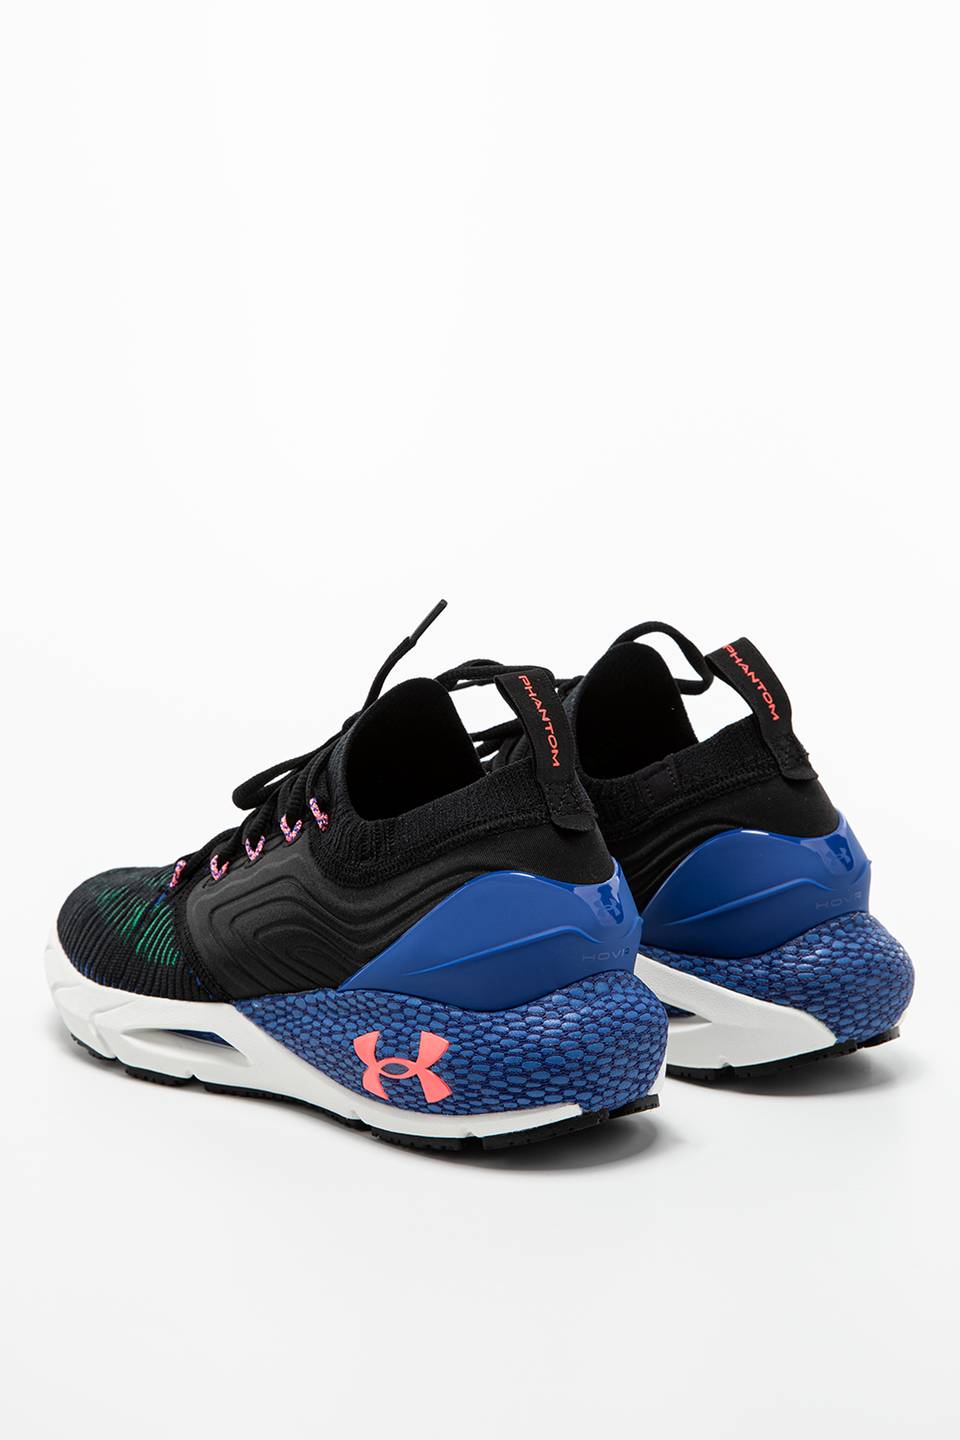 Sneakers Under Armour HOVR Phantom 2 INKNT 3024154-002